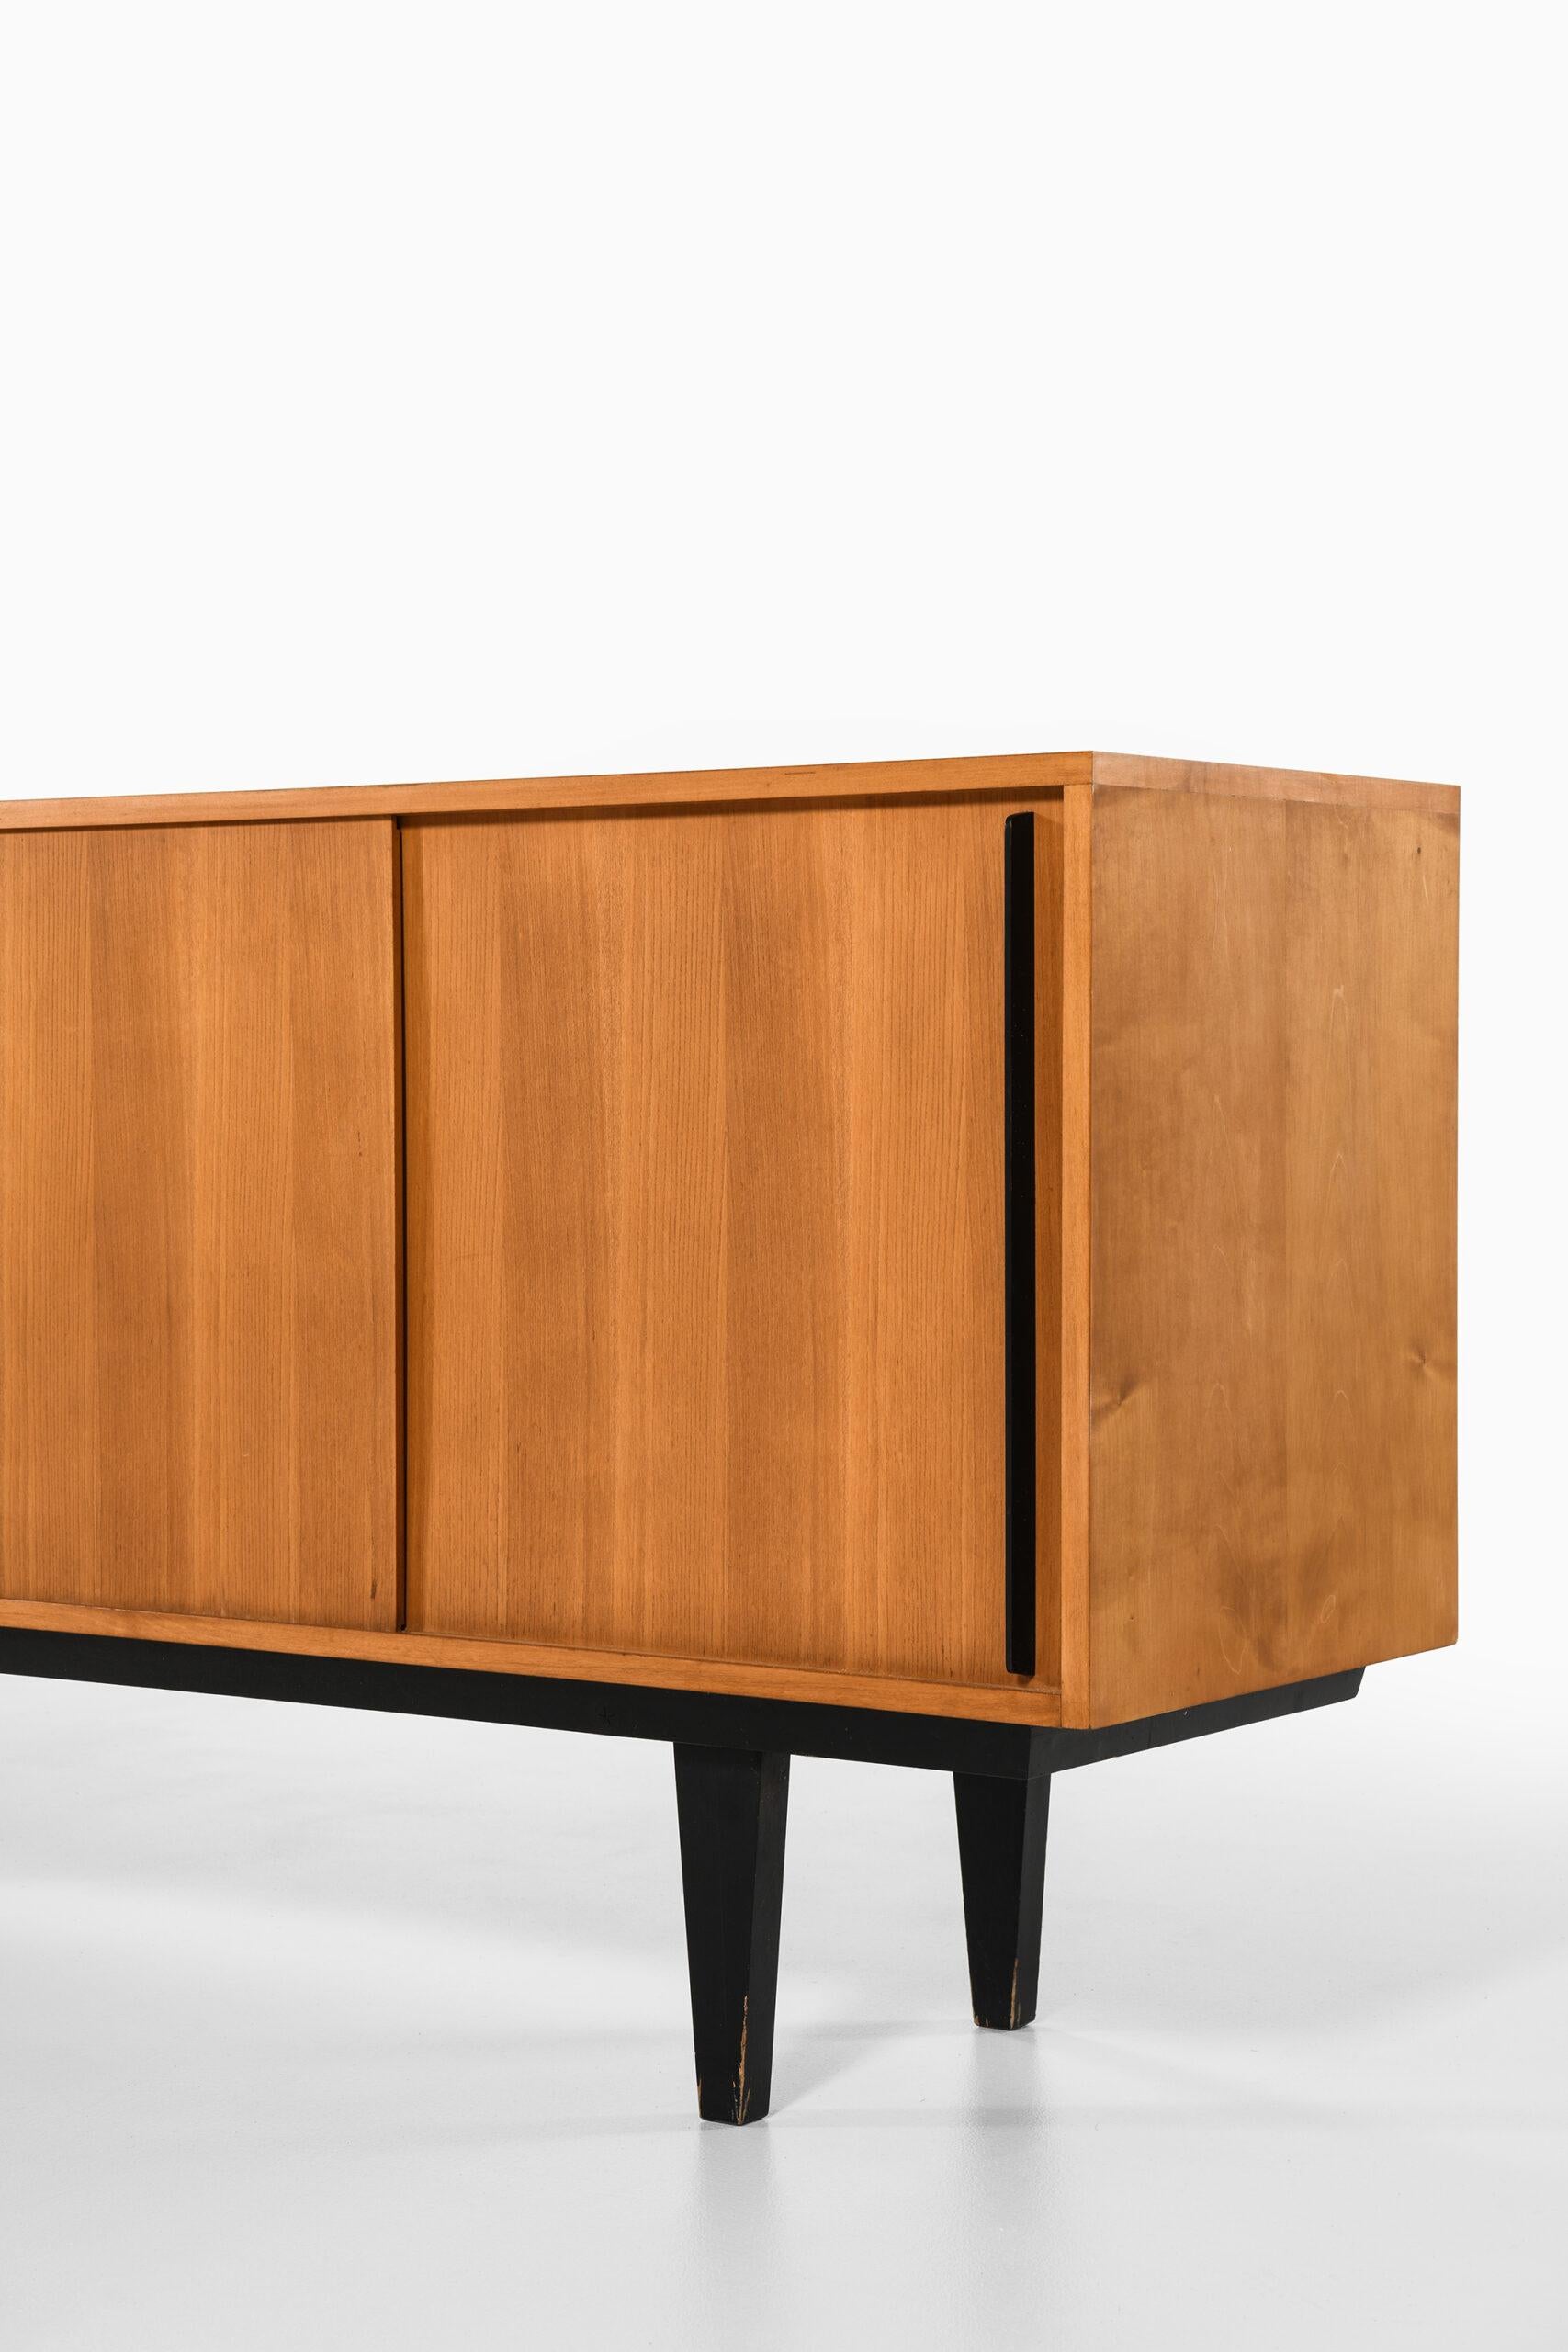 Wood Alfred Altherr Sideboard Produced by K.H. Frei Freba Typenmöbel For Sale